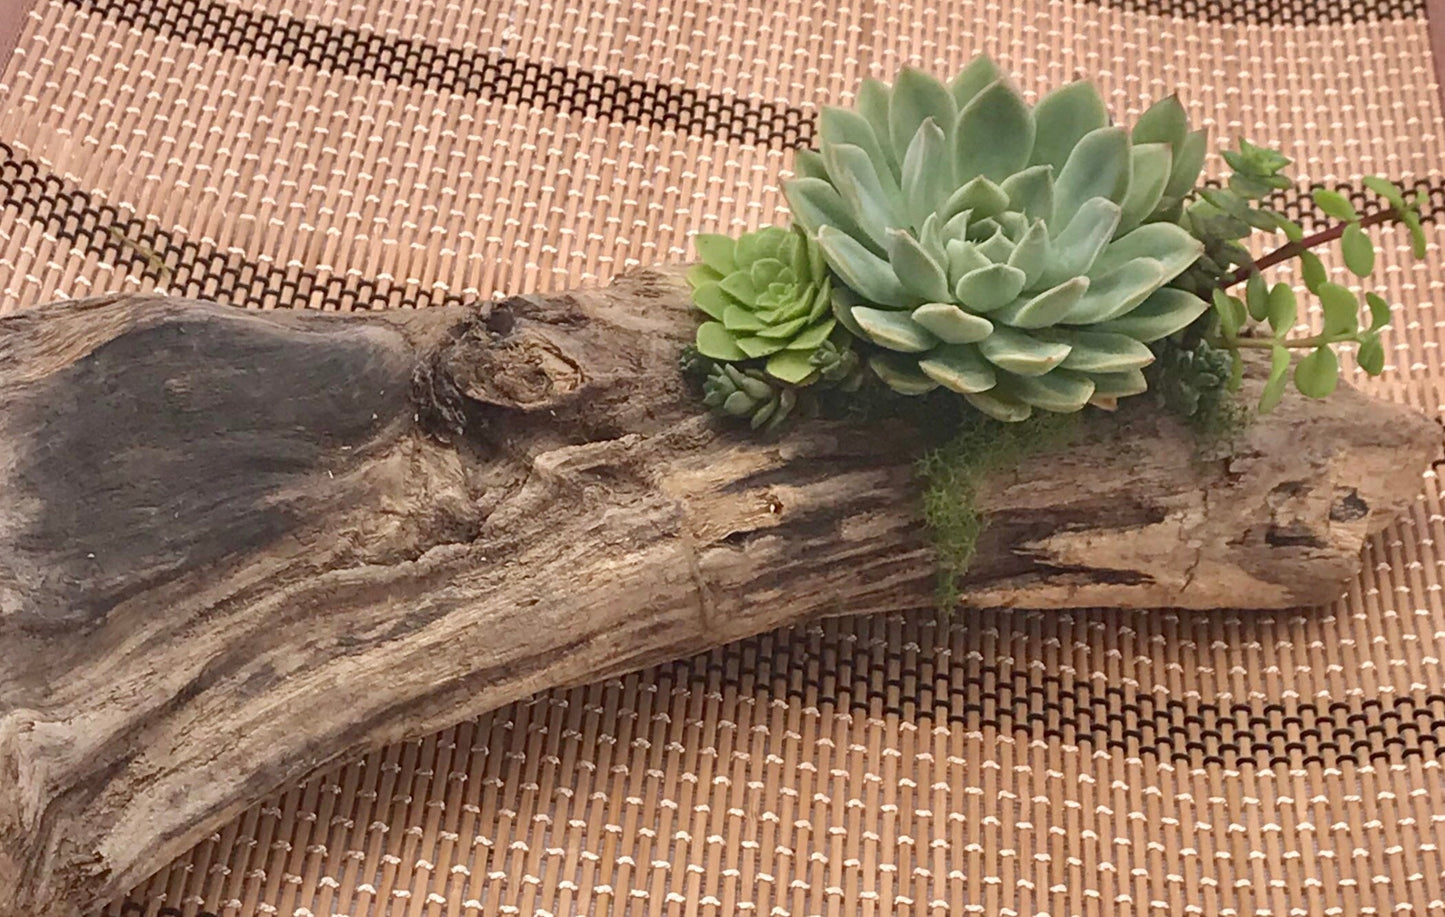 Driftwood succulent garden with totoro! Totoro's forest.